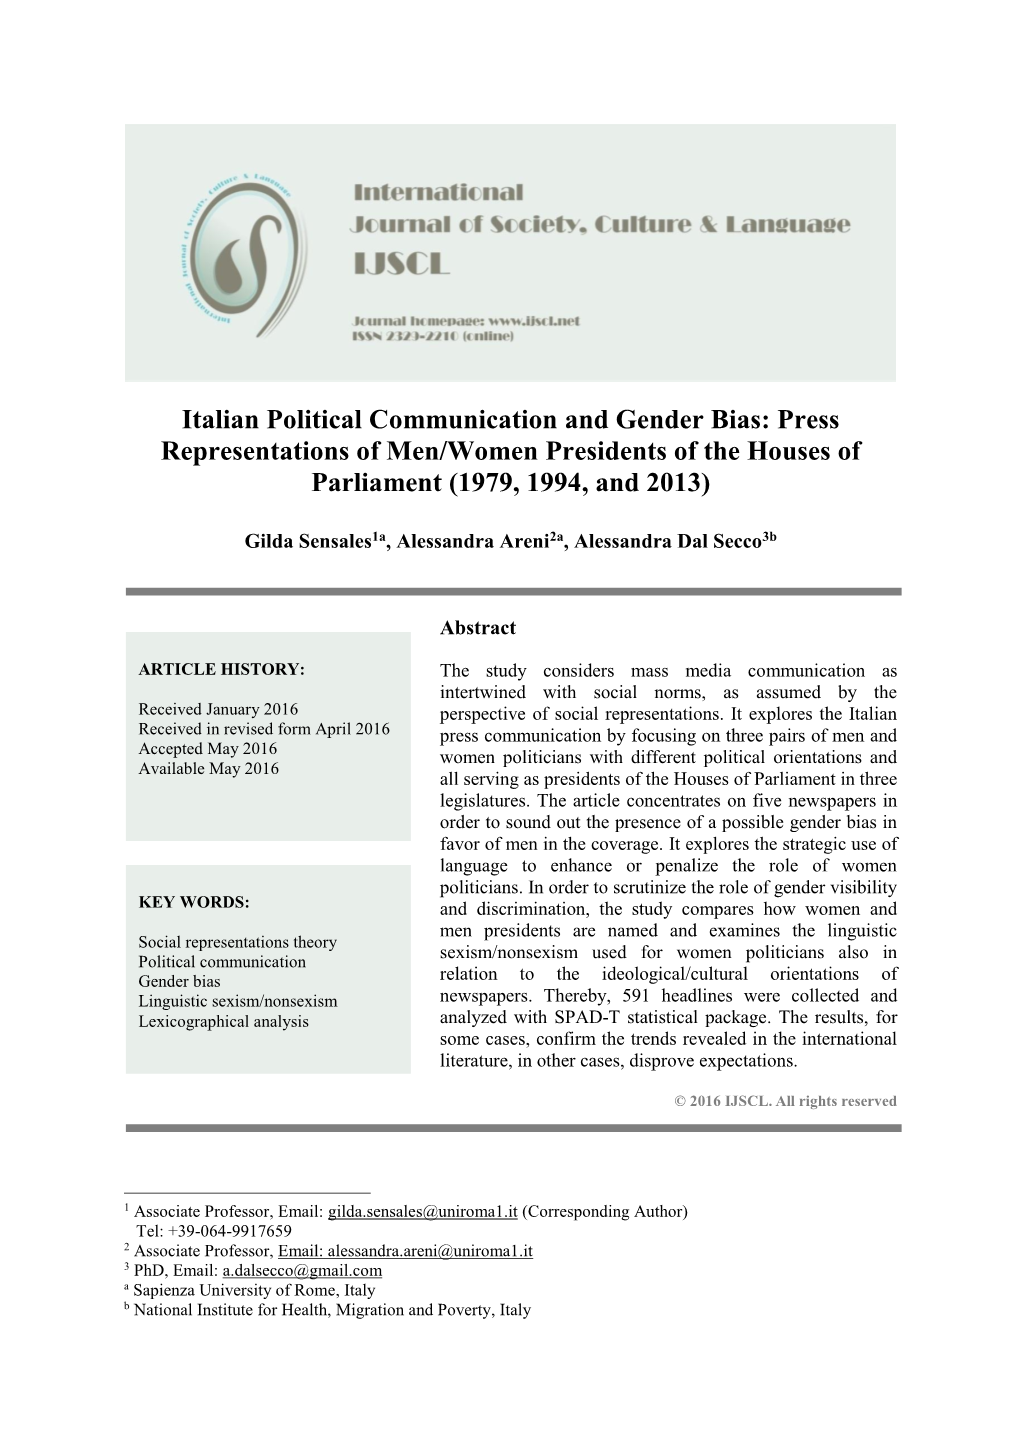 Italian Political Communication and Gender Bias: Press Representations of Men/Women Presidents of the Houses of Parliament (1979, 1994, and 2013)